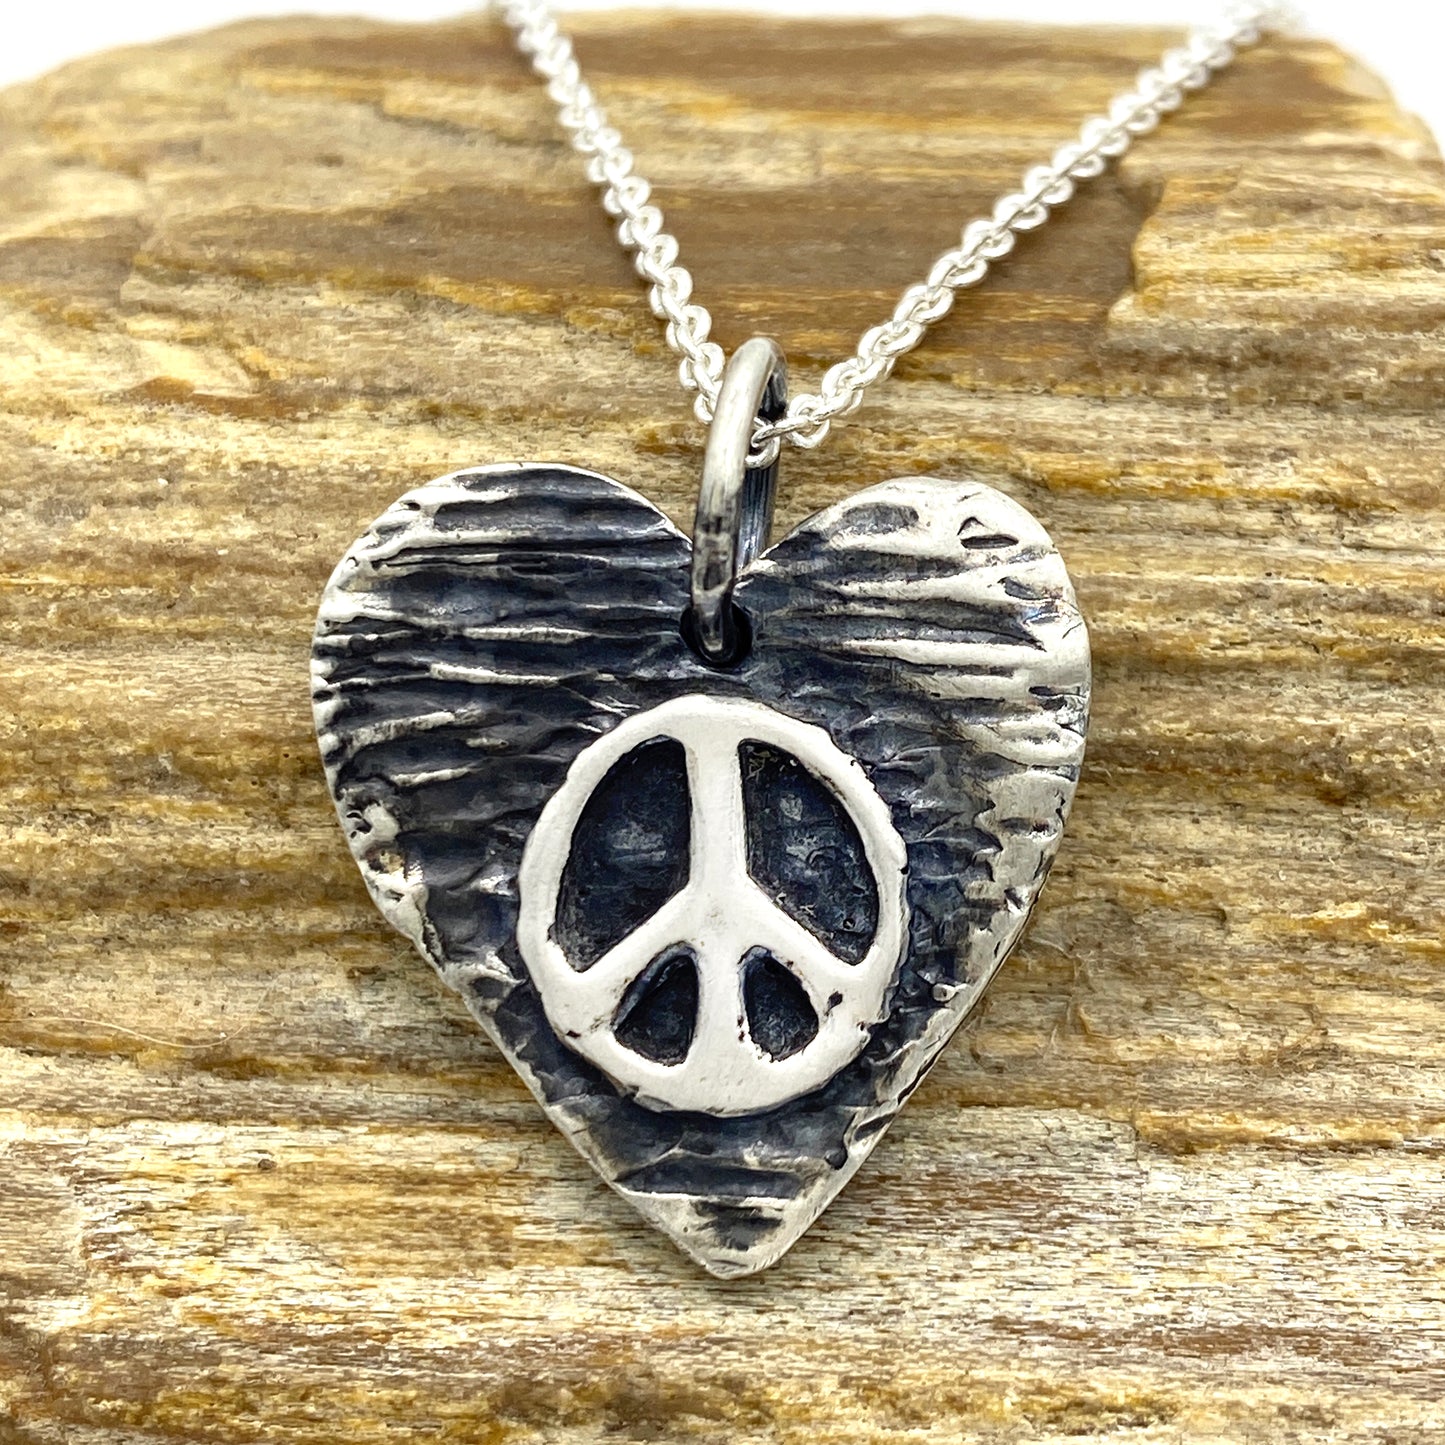 15mm x 15mm Heart shaped, textured pendant with a raised peace symbol in the middle, 5mm bail